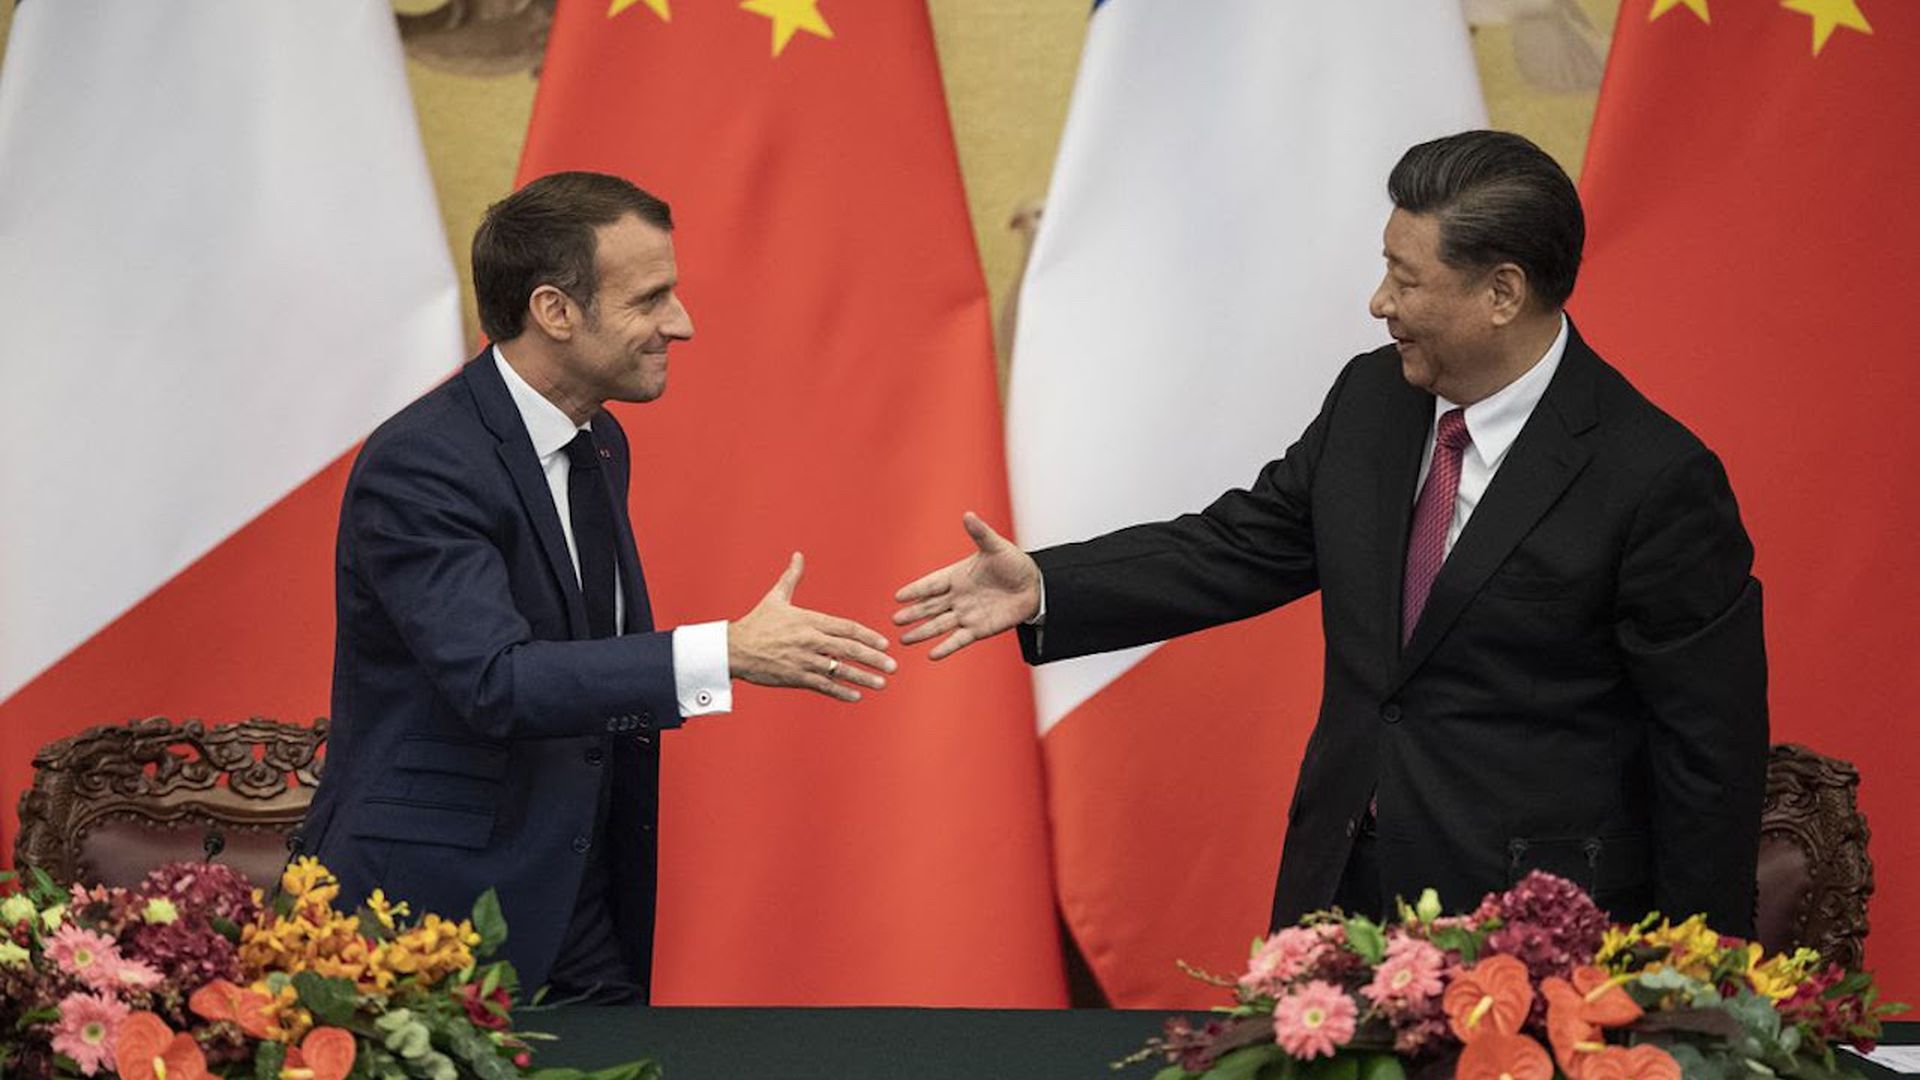 French President Macron shakes hands with Chinese President Xi